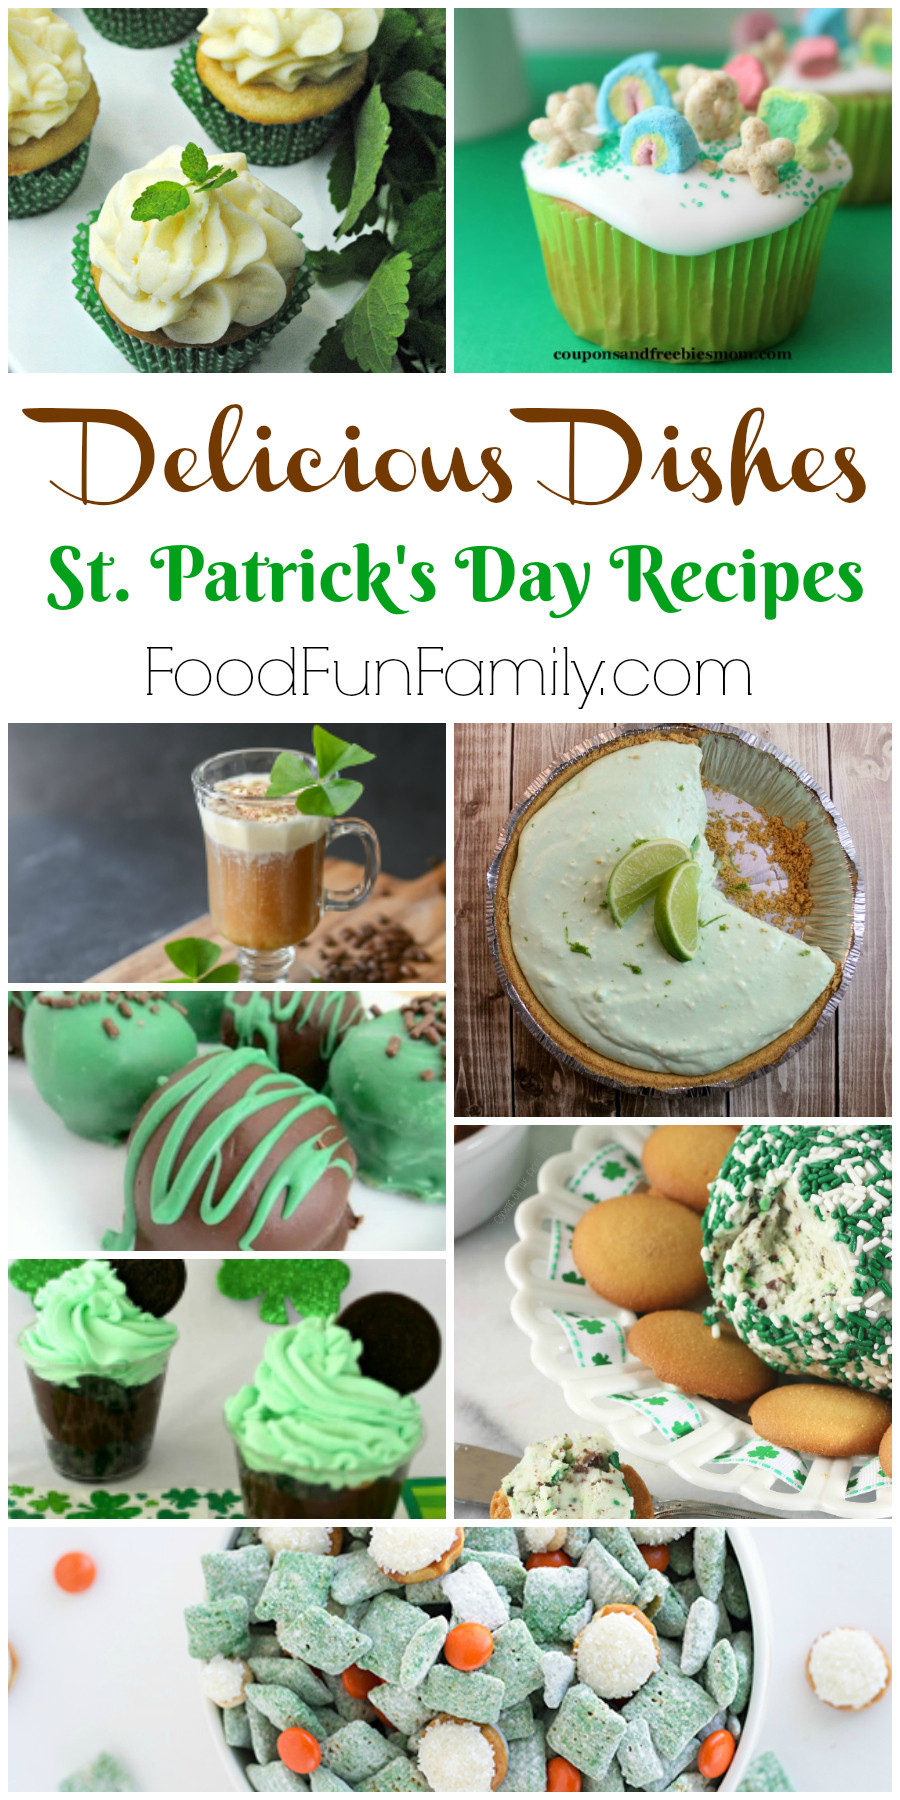 Recipes For St Patrick's Day Party
 Festive St Patrick’s Day Recipes – Delicious Dishes